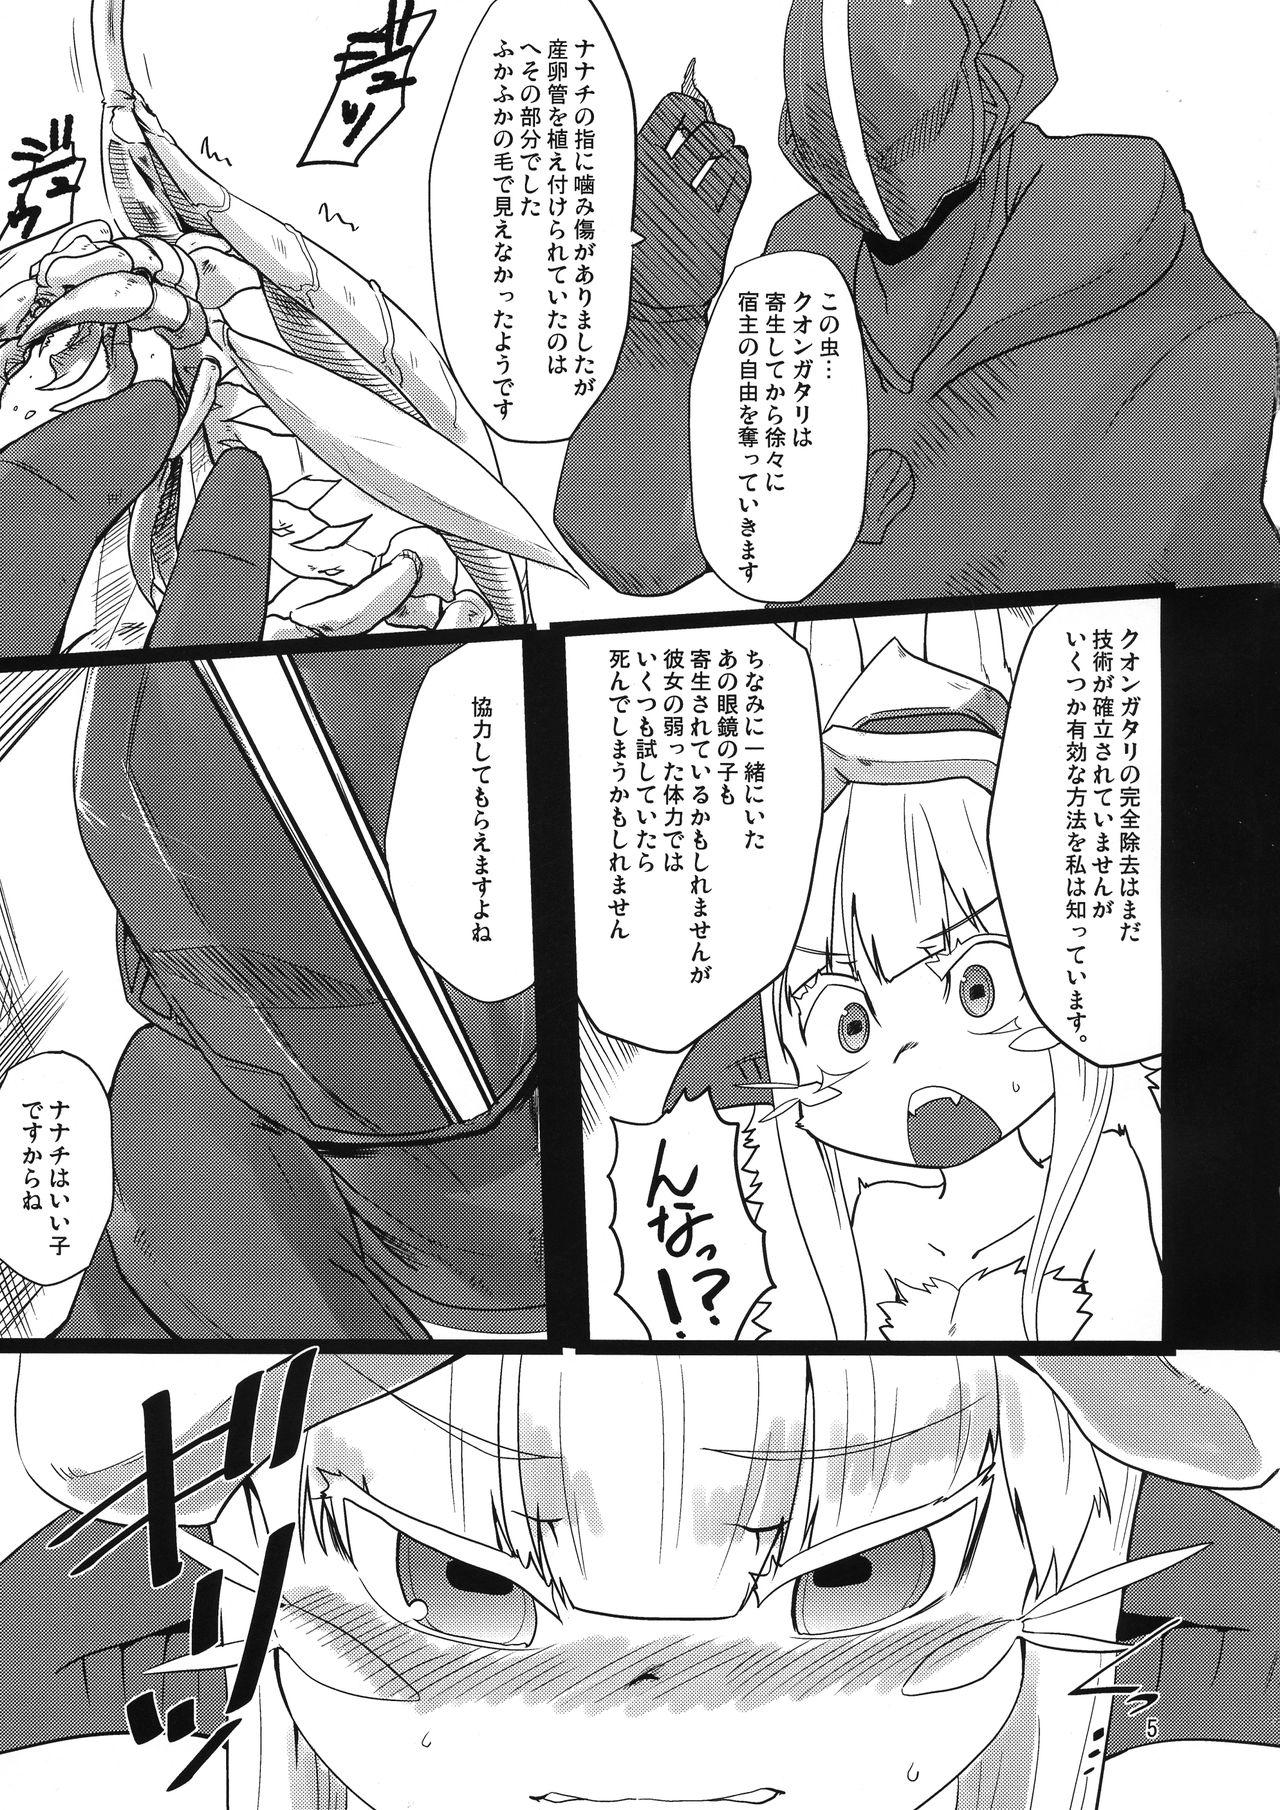 Marido Made in Nanachi - Made in abyss Internal - Page 5